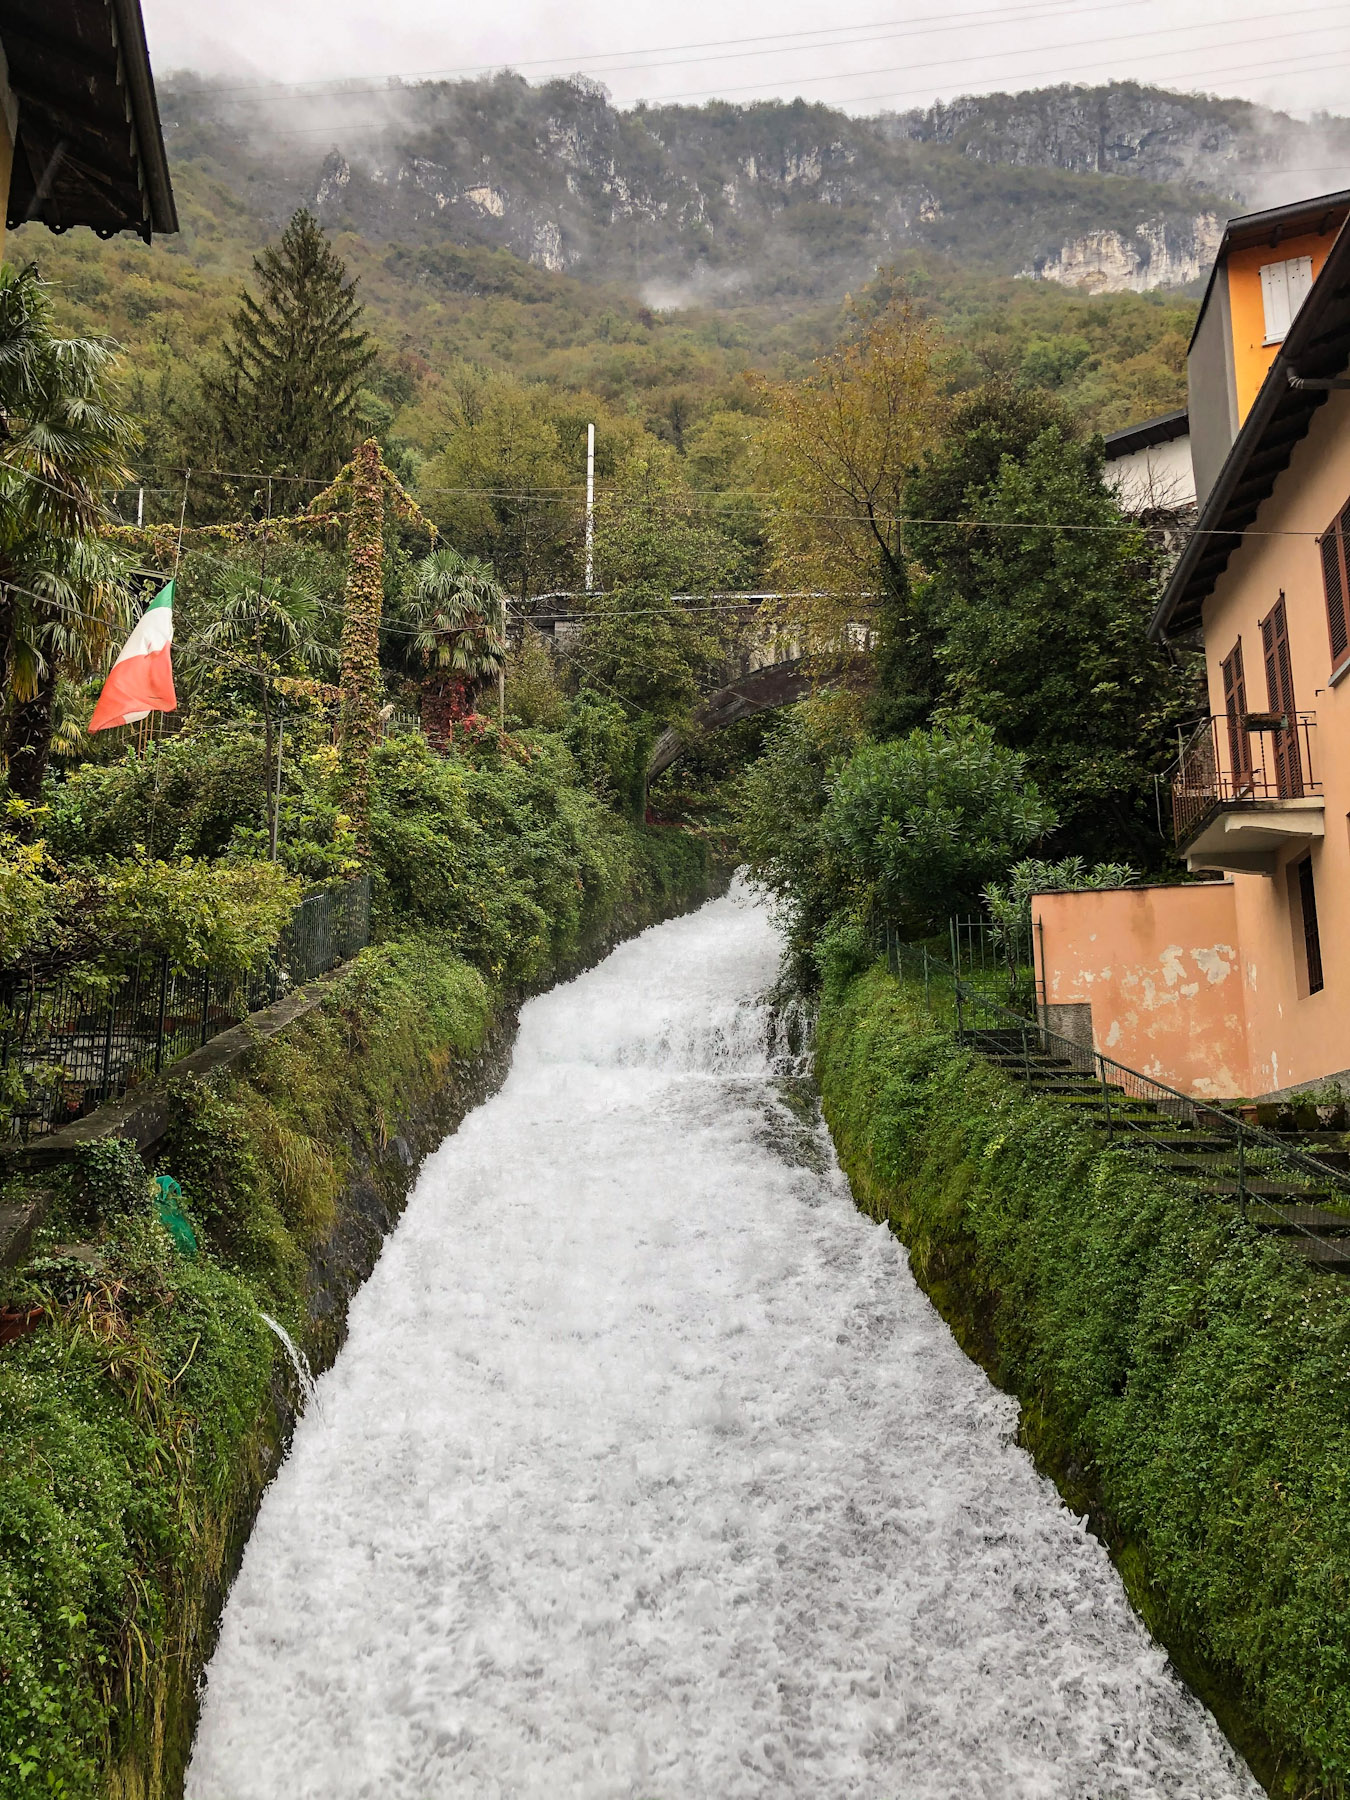 The River and Village of Fiumelatte, Italy